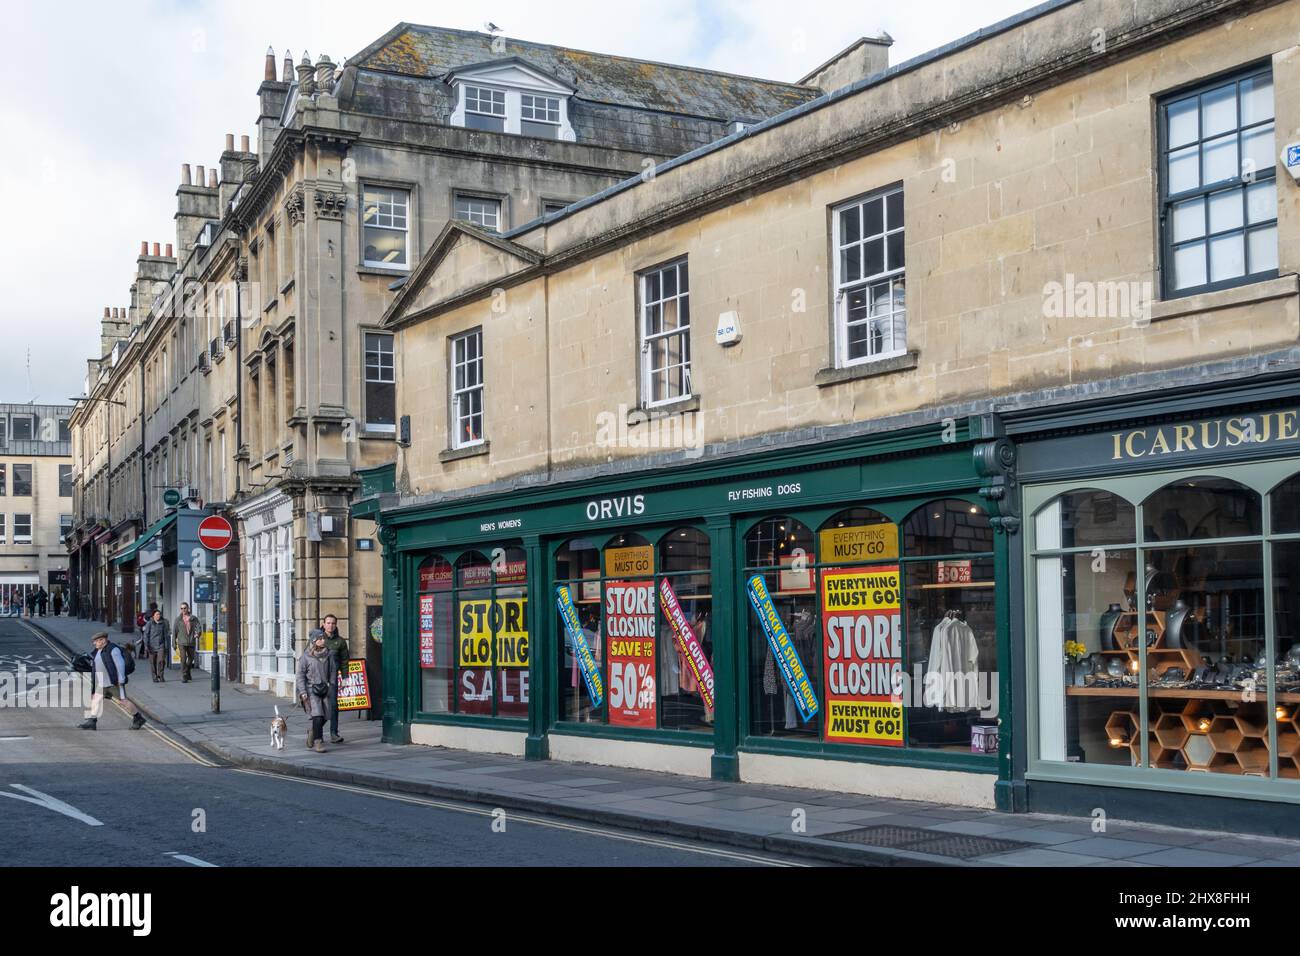 Orvis store in Bath closing down with 50% sale, 1 Pulteney Bridge, City of Bath, Somerset, England, UK Stock Photo